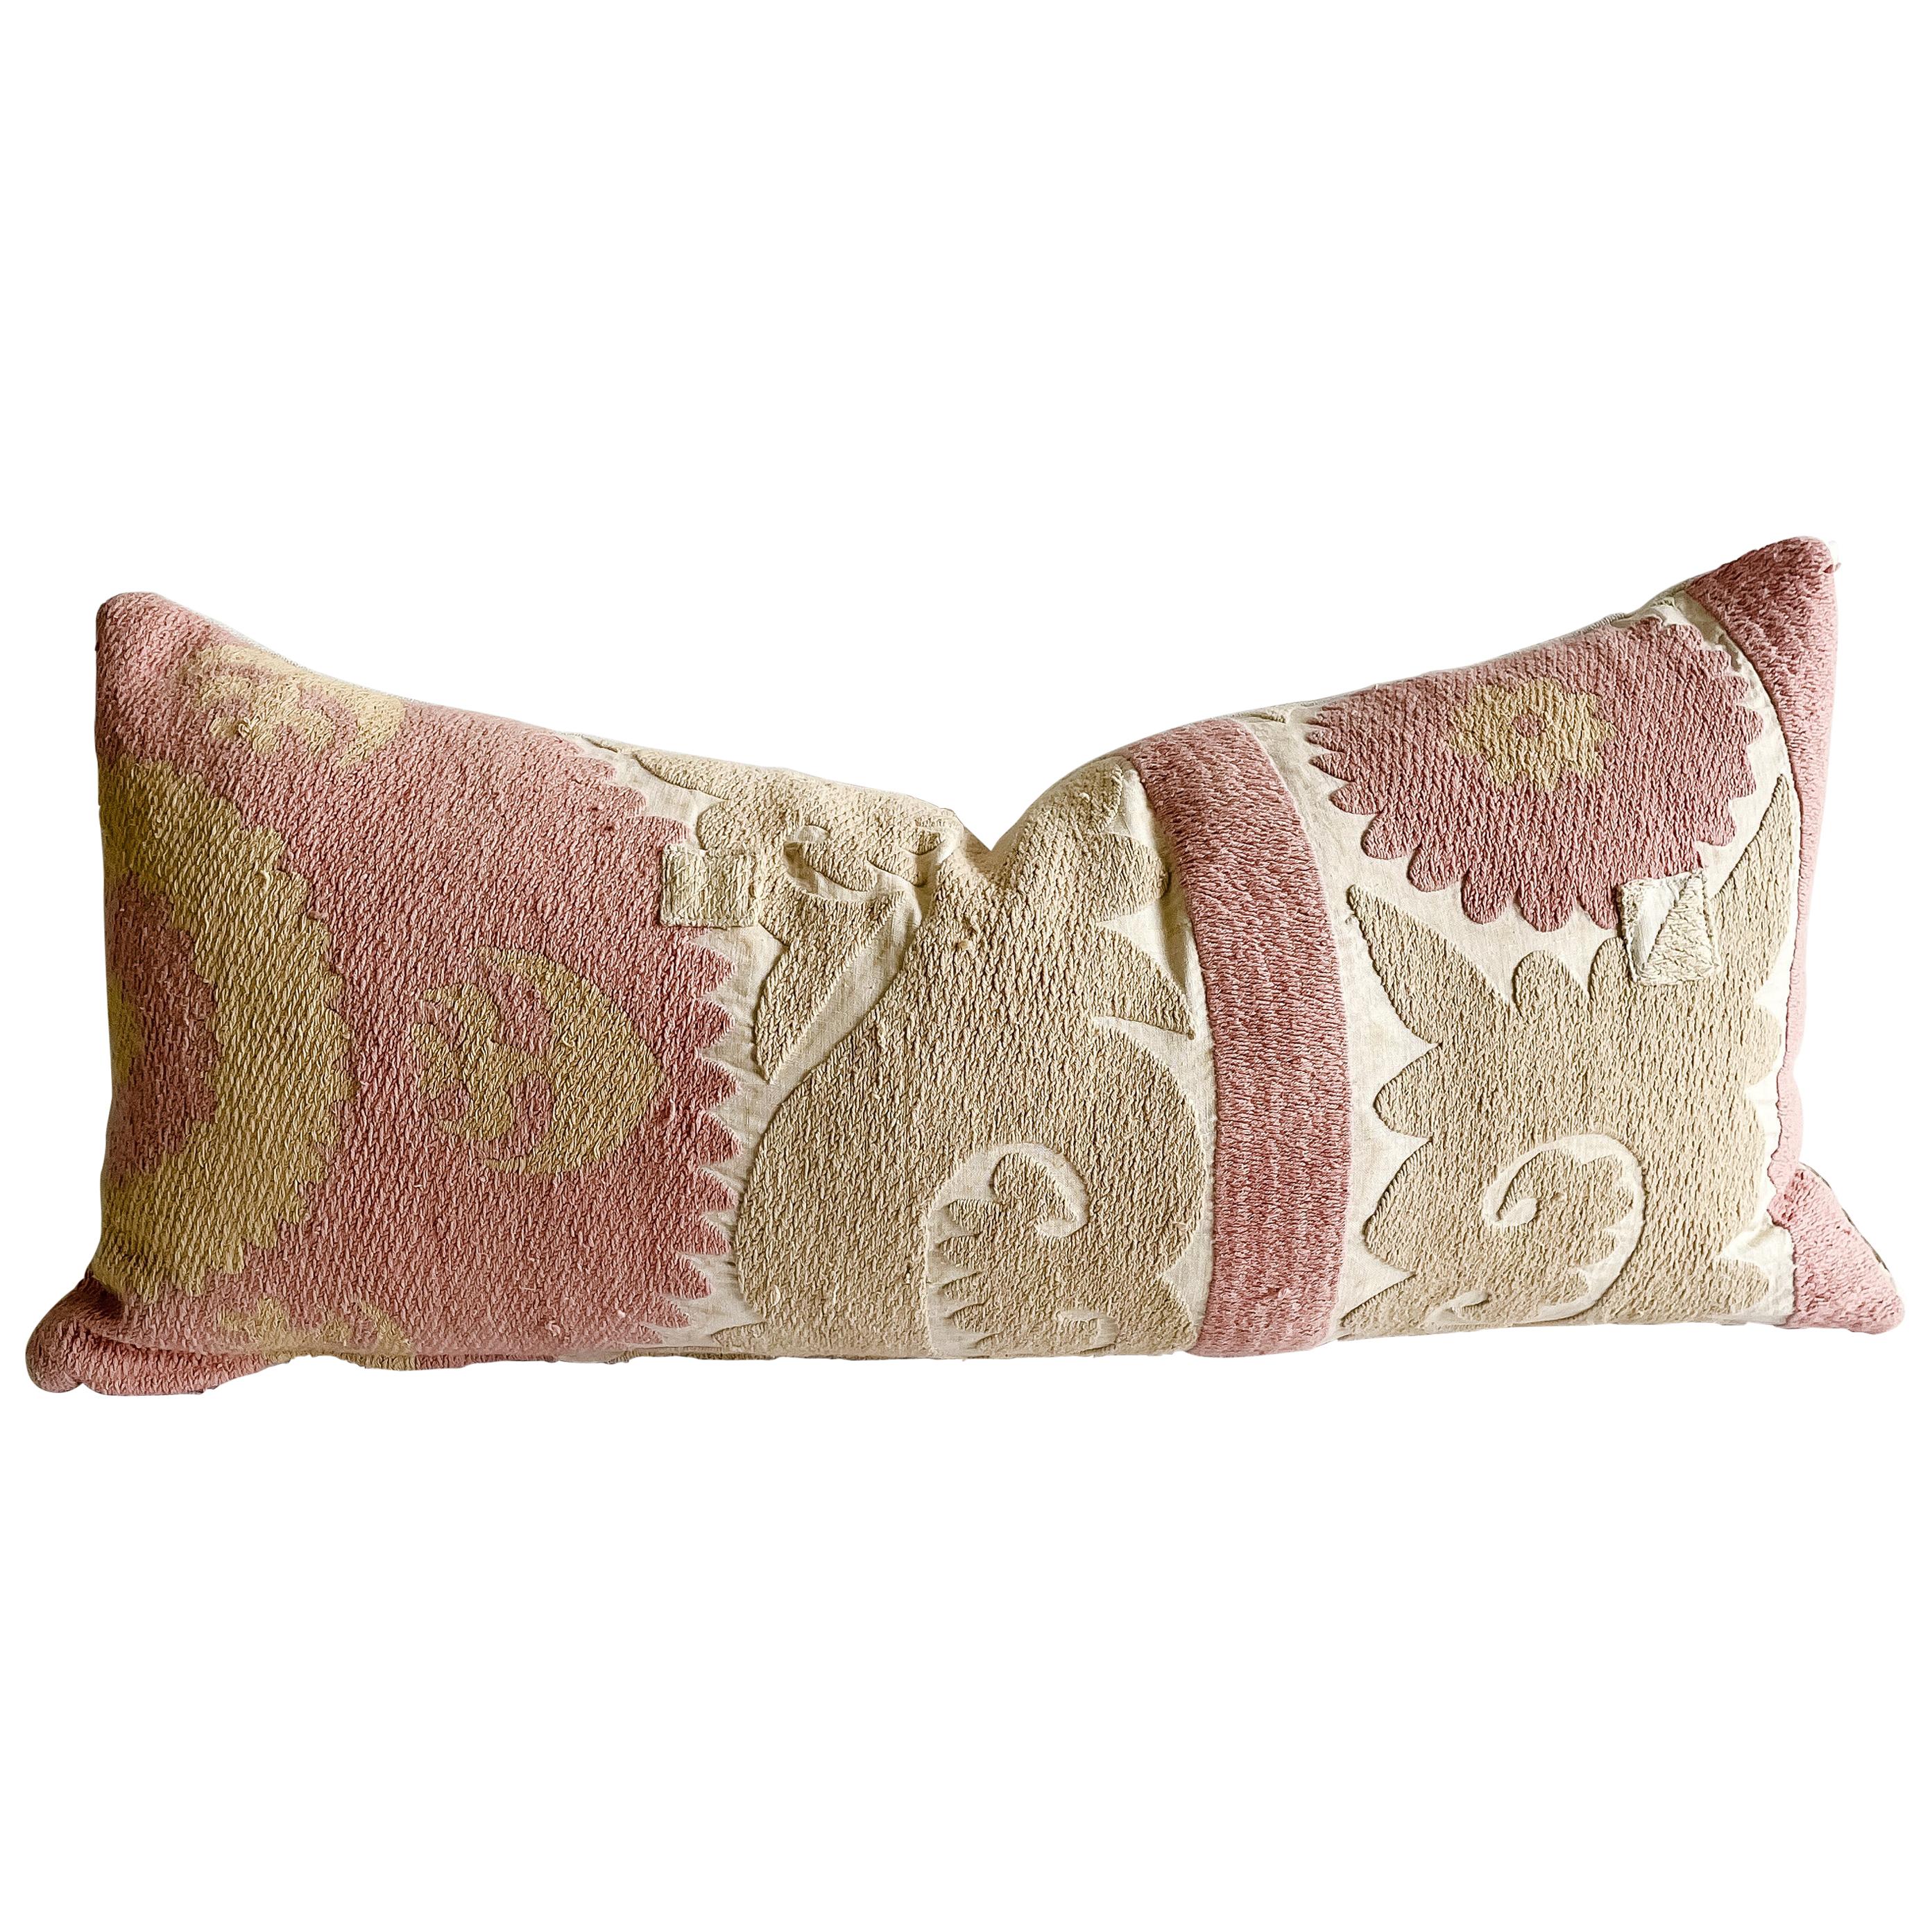 Vintage Pink and Tan Suzani Embroidered Pillow with Down Feather Insert